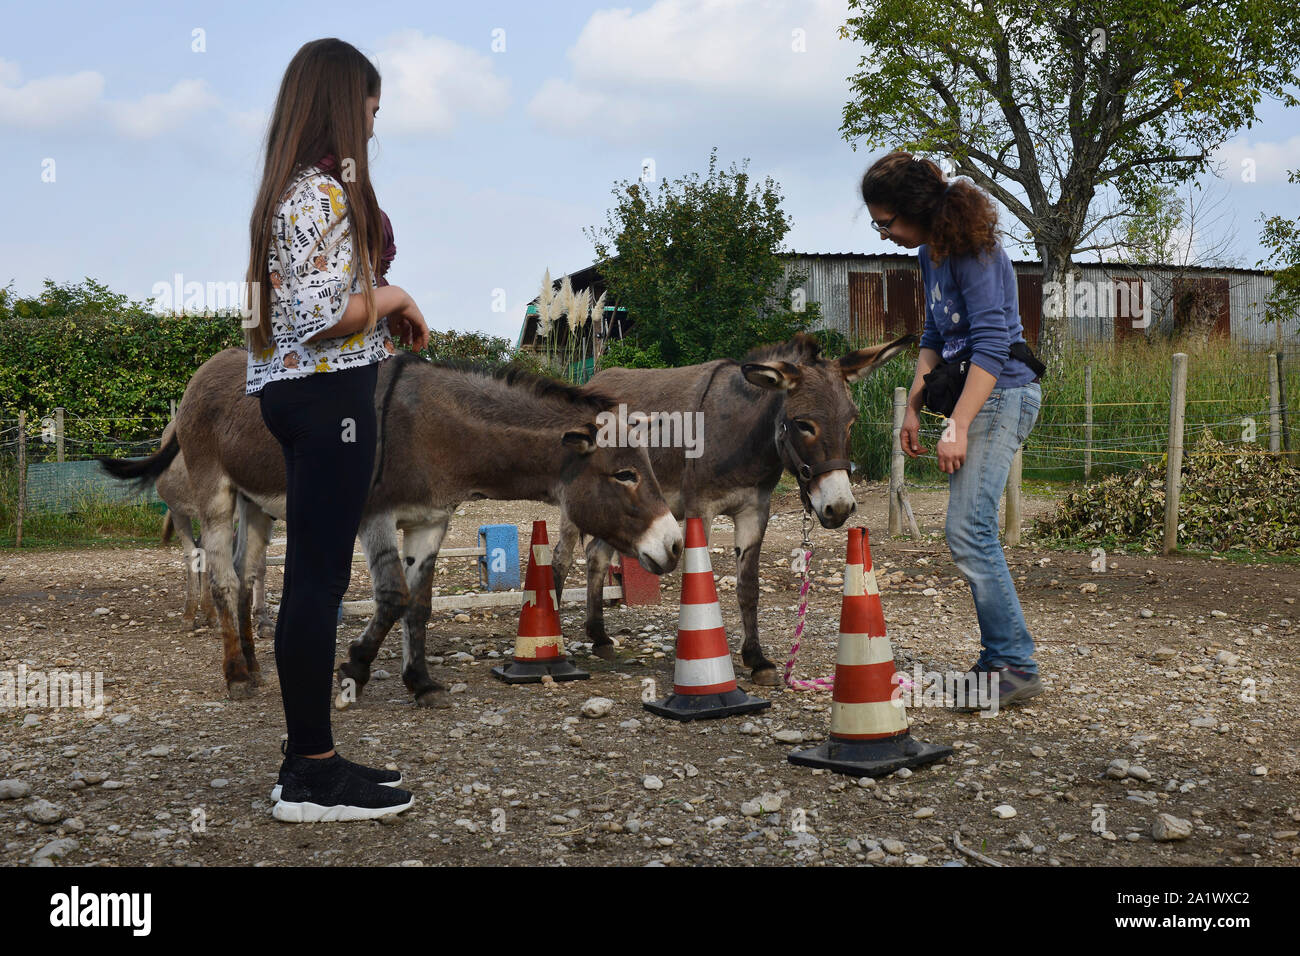 Animal-assisted therapy (AAT)/ animal-assisted intervention (AAI) or treatment for children that includes donkeys in a therapeutic context. Stock Photo